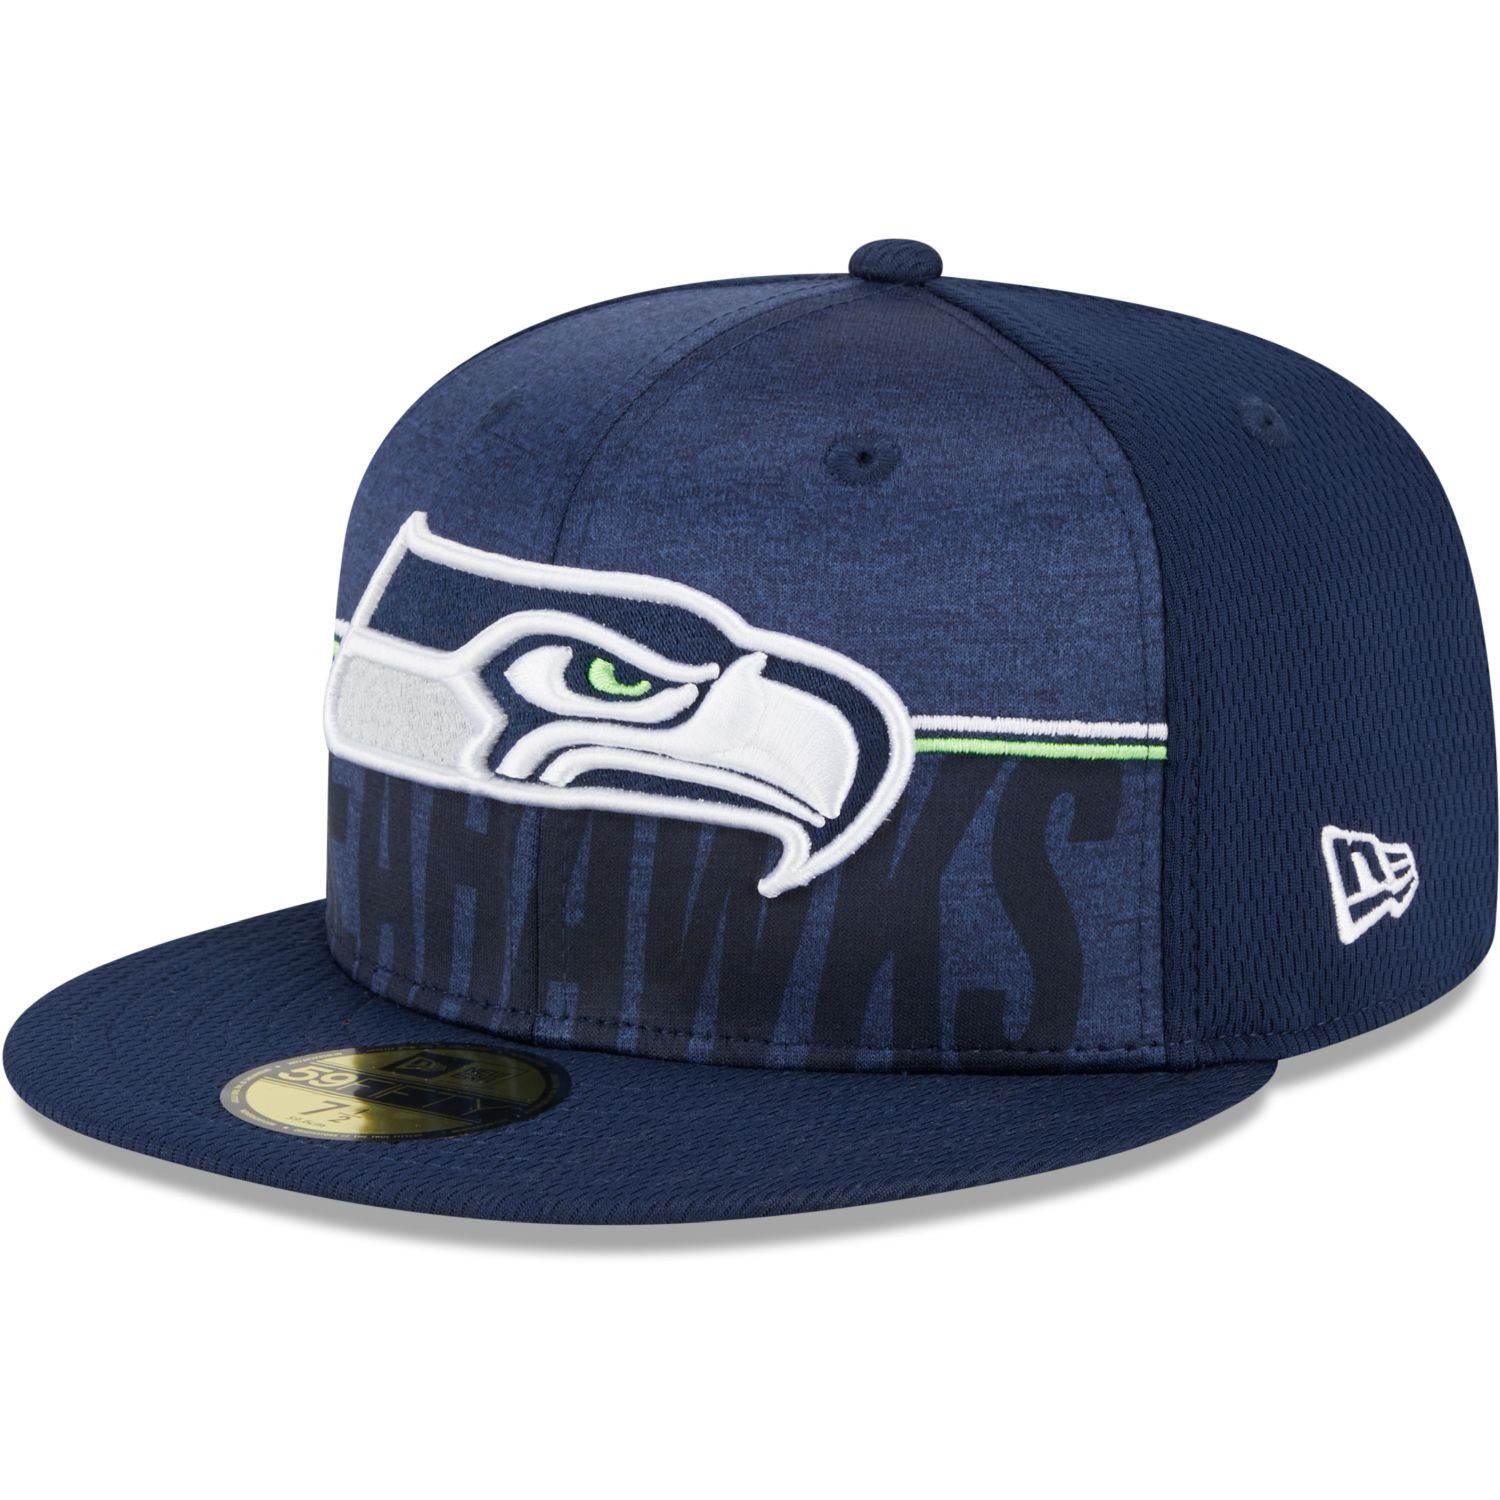 New Era Fitted Cap Seattle Seahawks NFL 59Fifty TRAINING